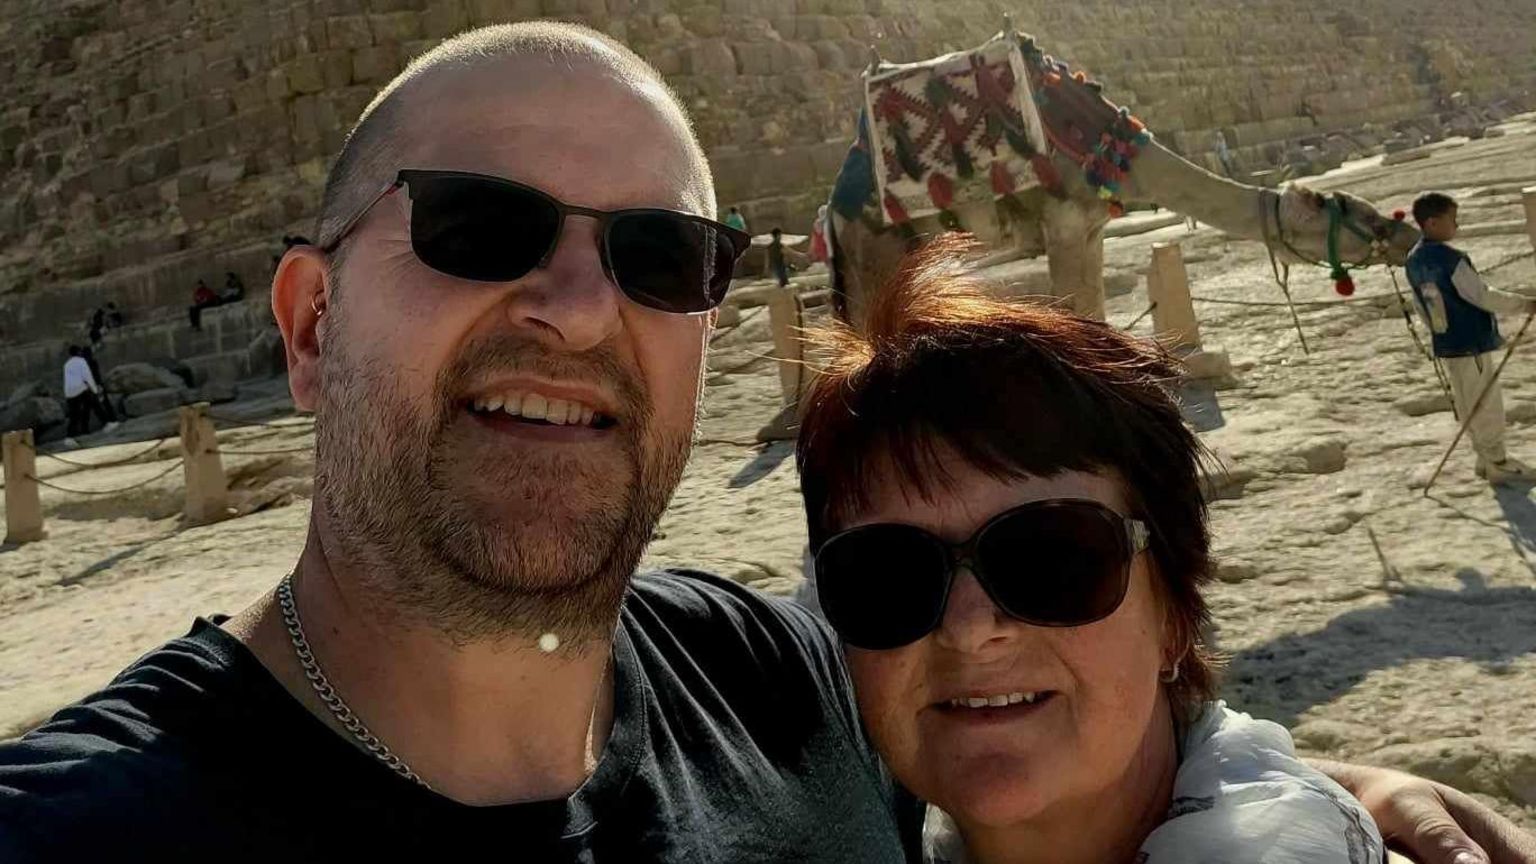 Ian and his wife Ria in front of the Egyptian pyramids